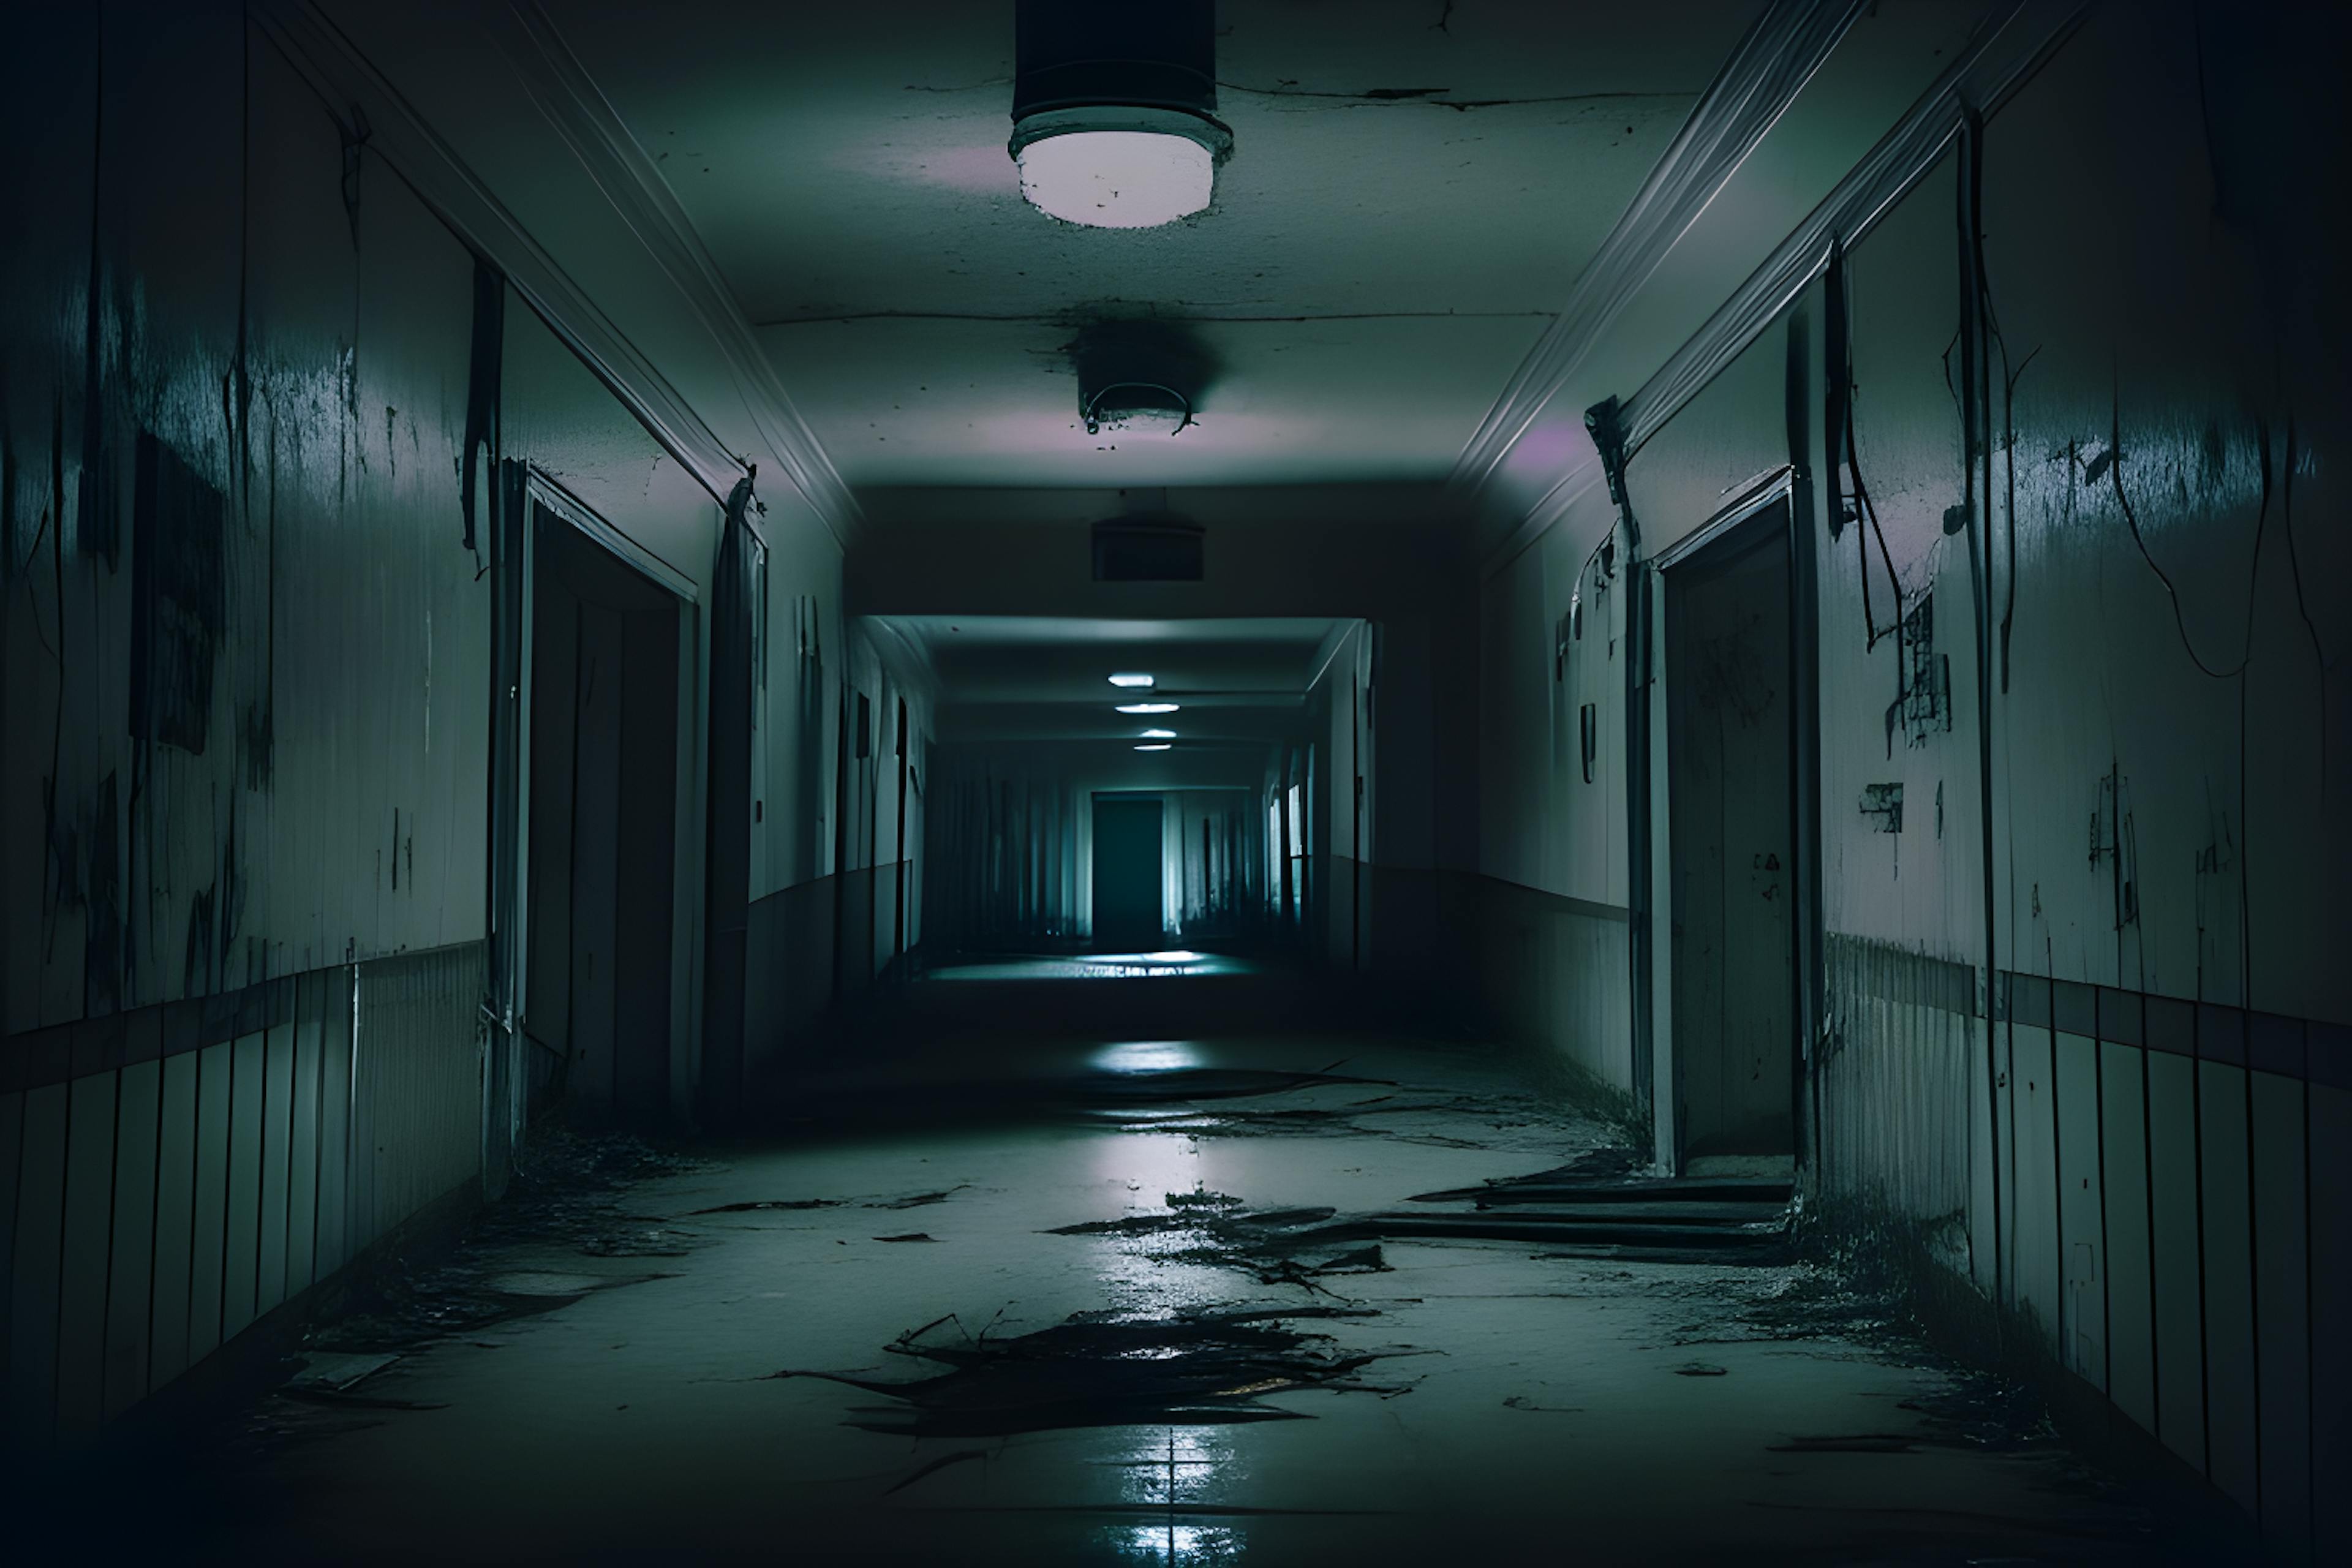 This image was generated by HackerNoon's AI Image Generator via the prompt "a pitch black abandoned hospital hallway".